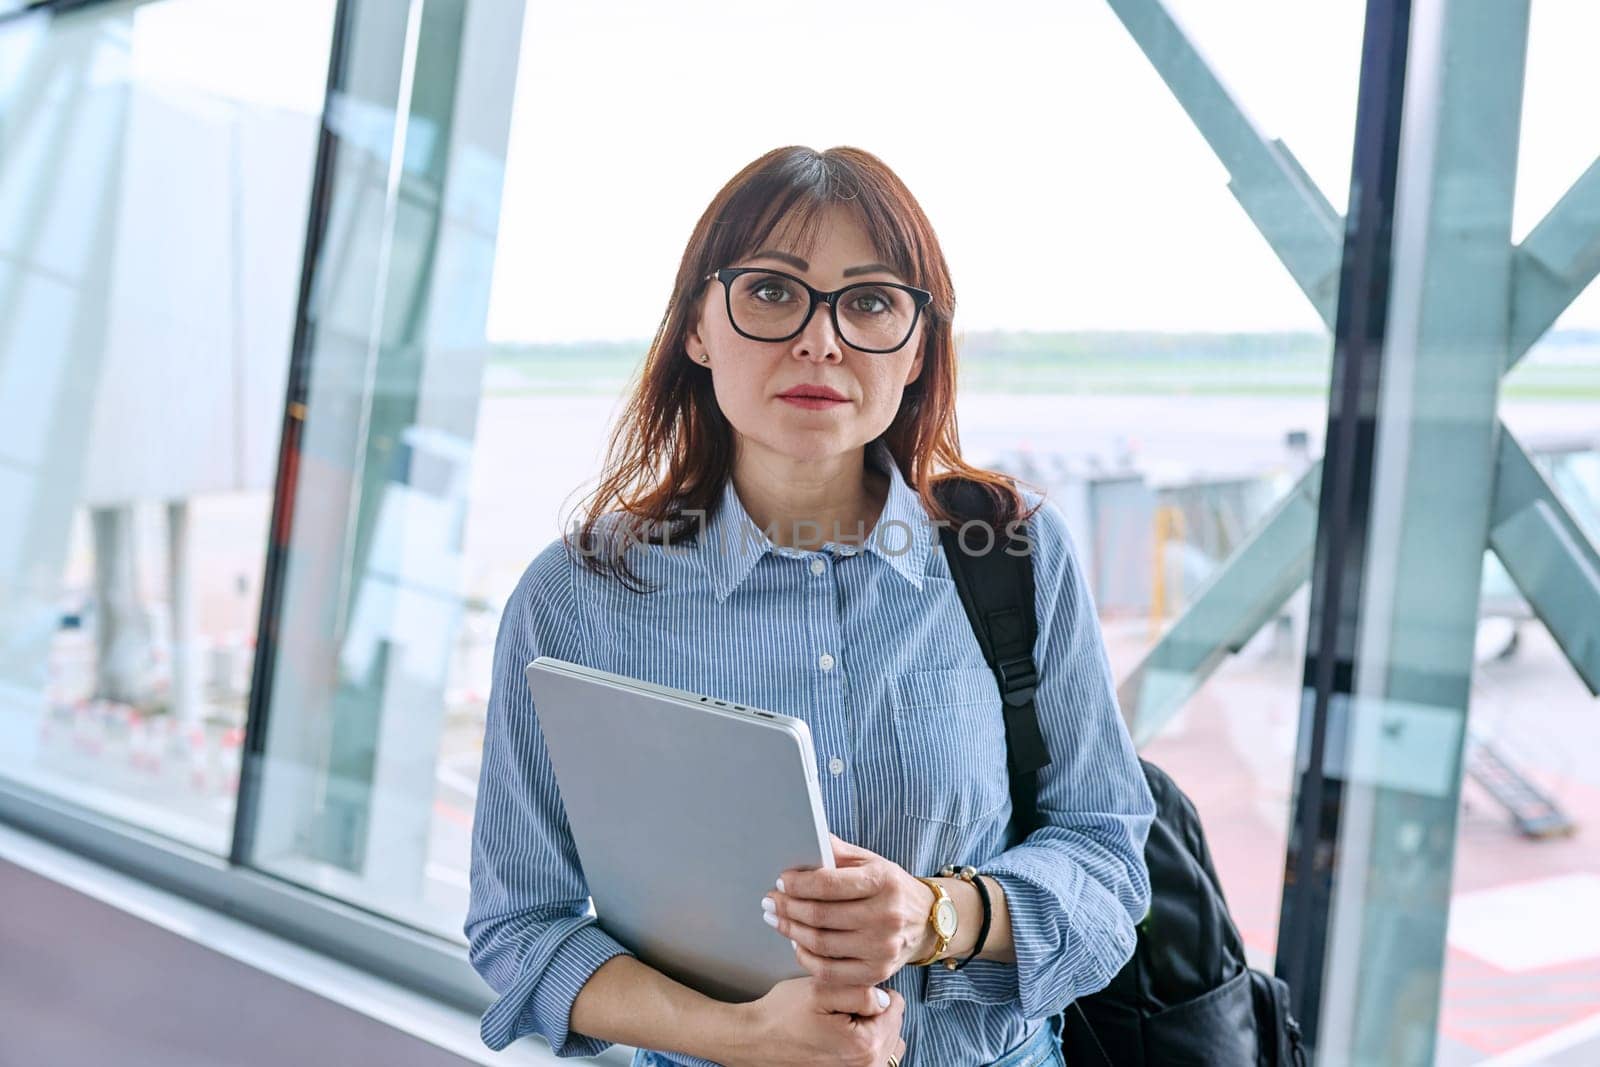 Middle aged woman with backpack waiting for airplane flight in airport terminal, holding laptop, looking at camera. Travel, business trip, passenger air transport concept